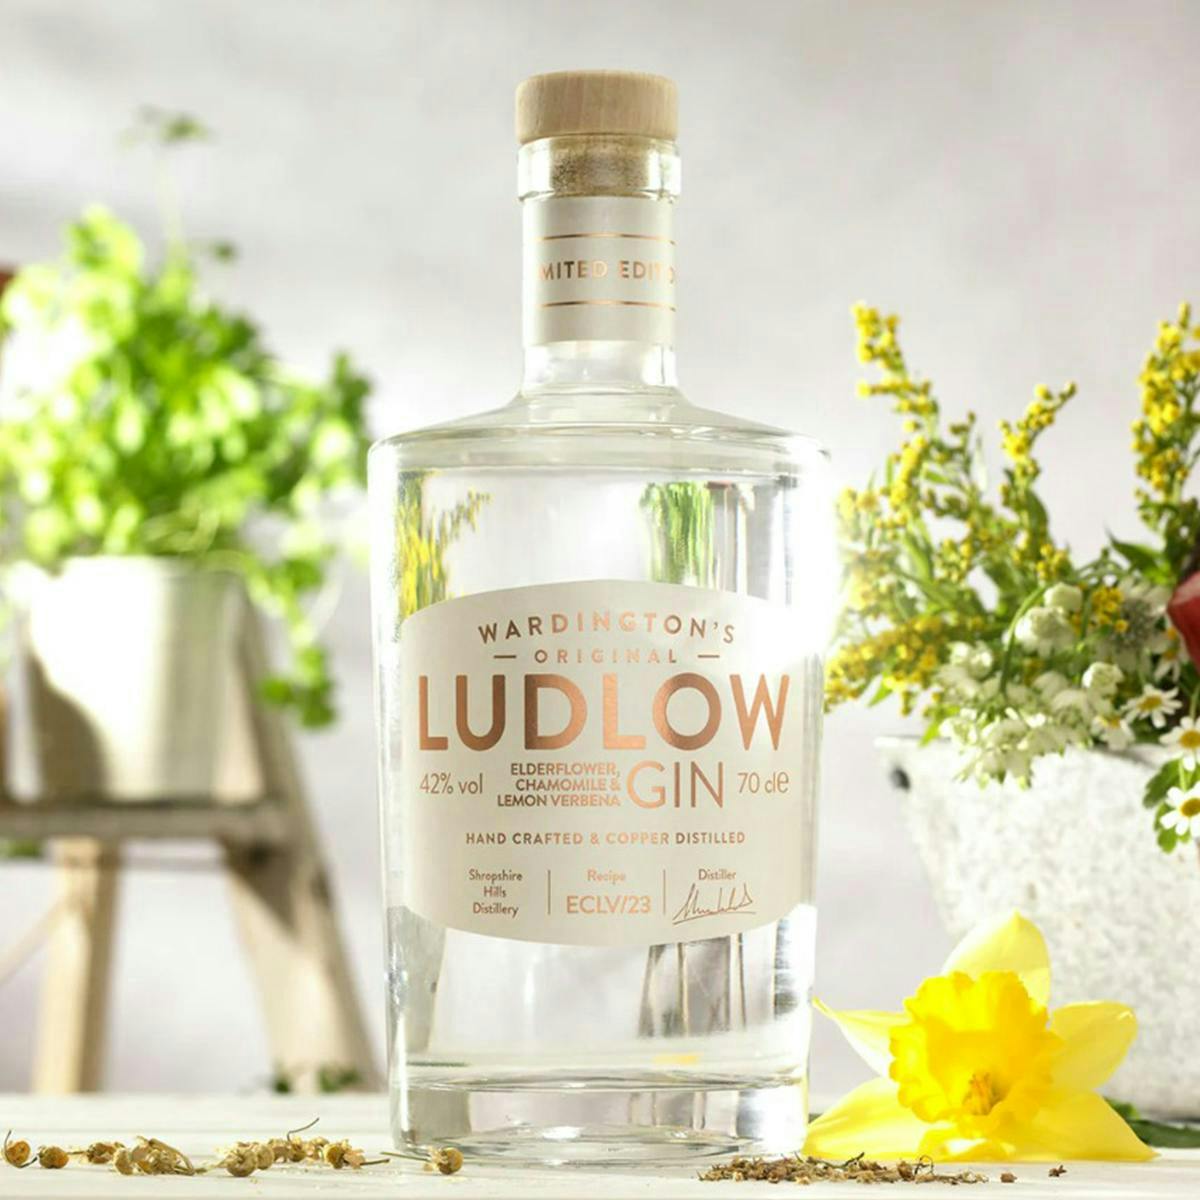 A bottle of Ludlow elderflower gin with some plants by its side to show the spring theme